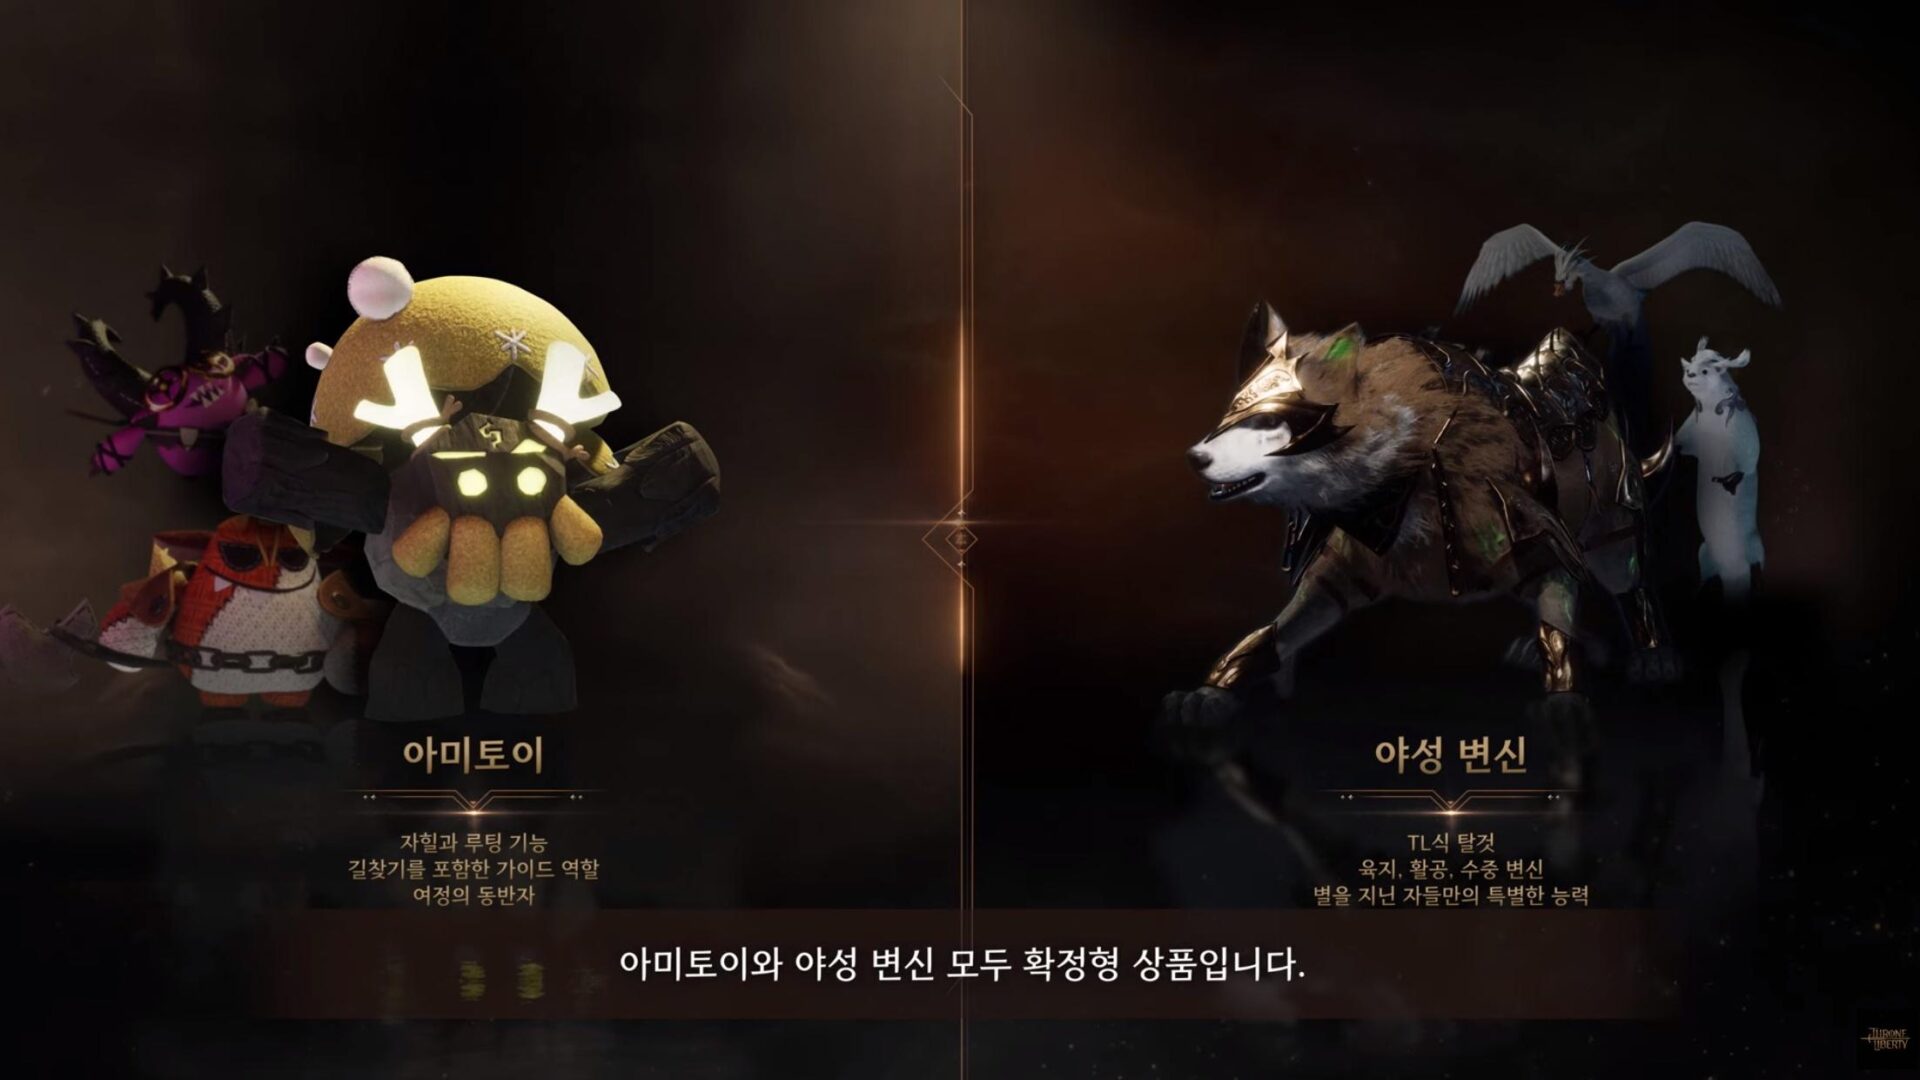 NCSOFT to launch Throne and Liberty on Dec. 7 - The Korea Times